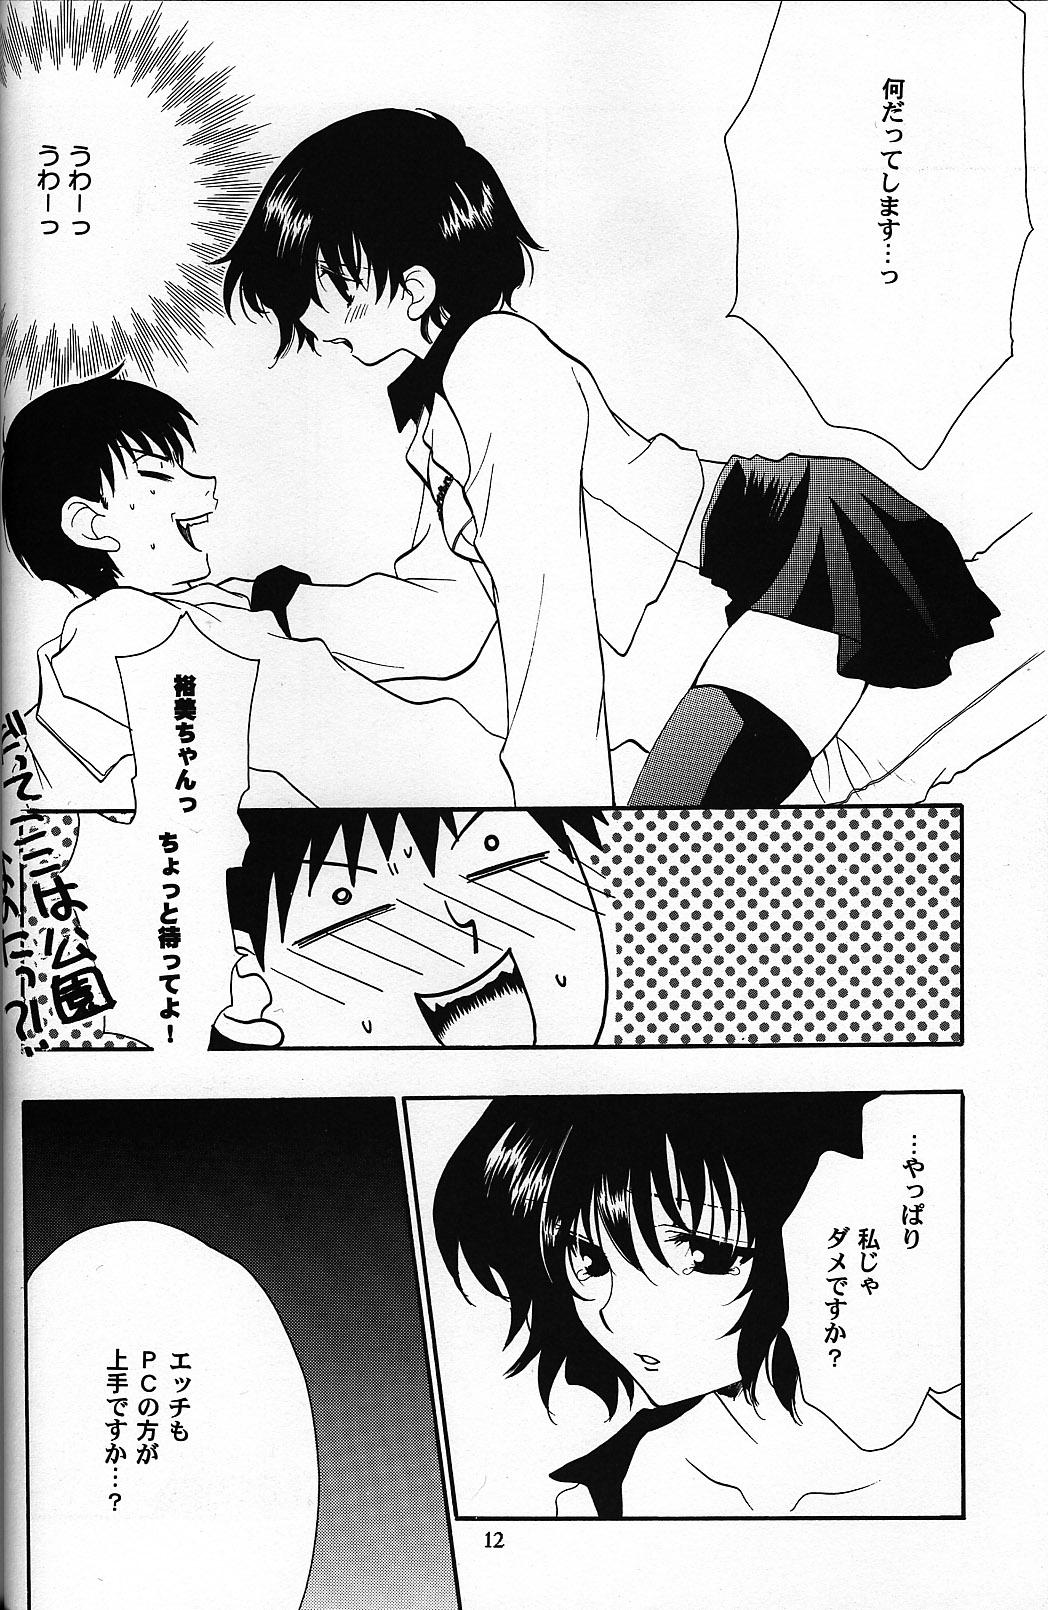 Oldvsyoung C-HOBIT 2 - Chobits Gay Sex - Page 11